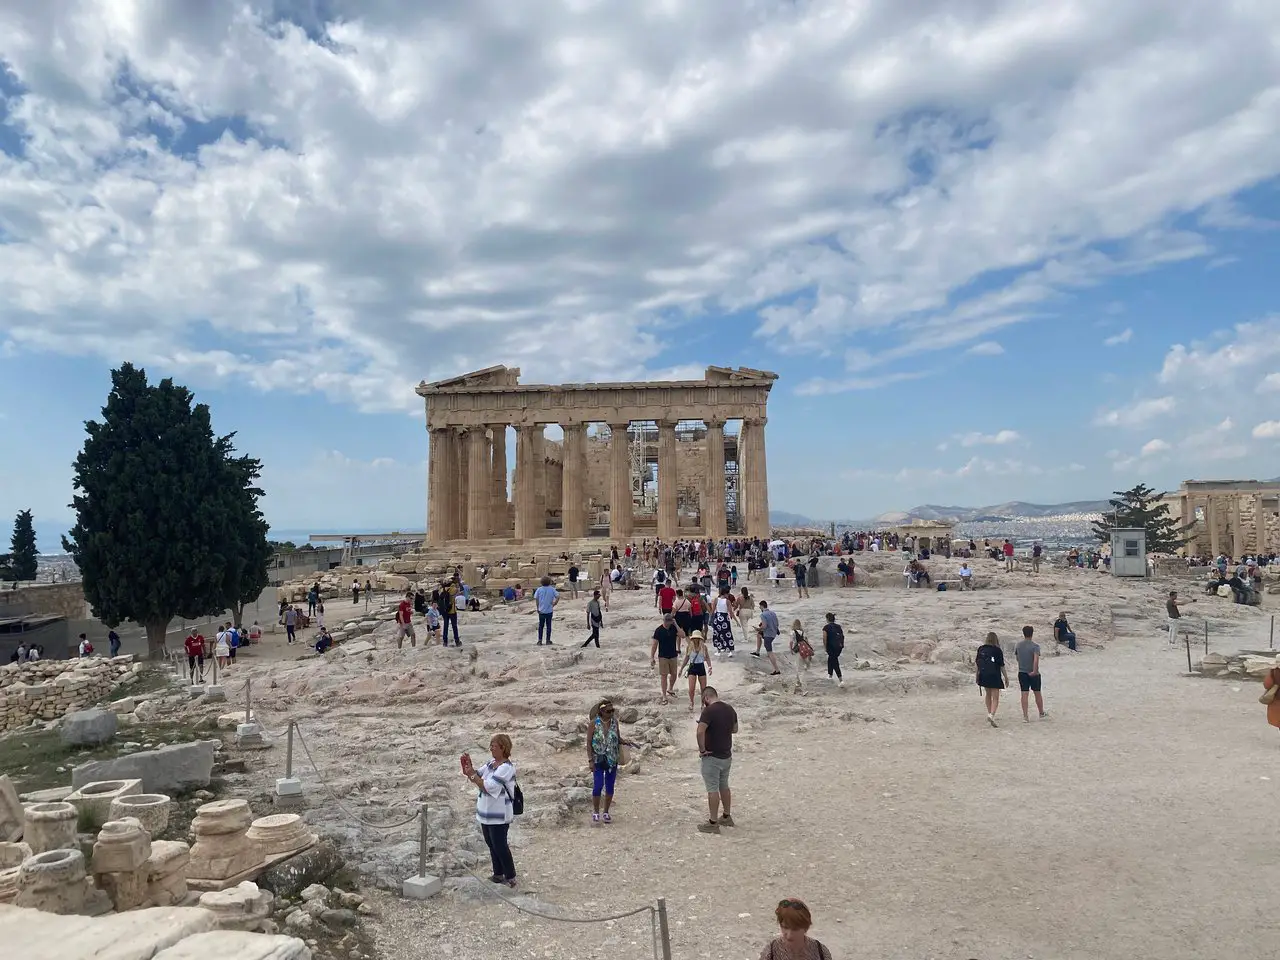 Athens Combined Ticket review